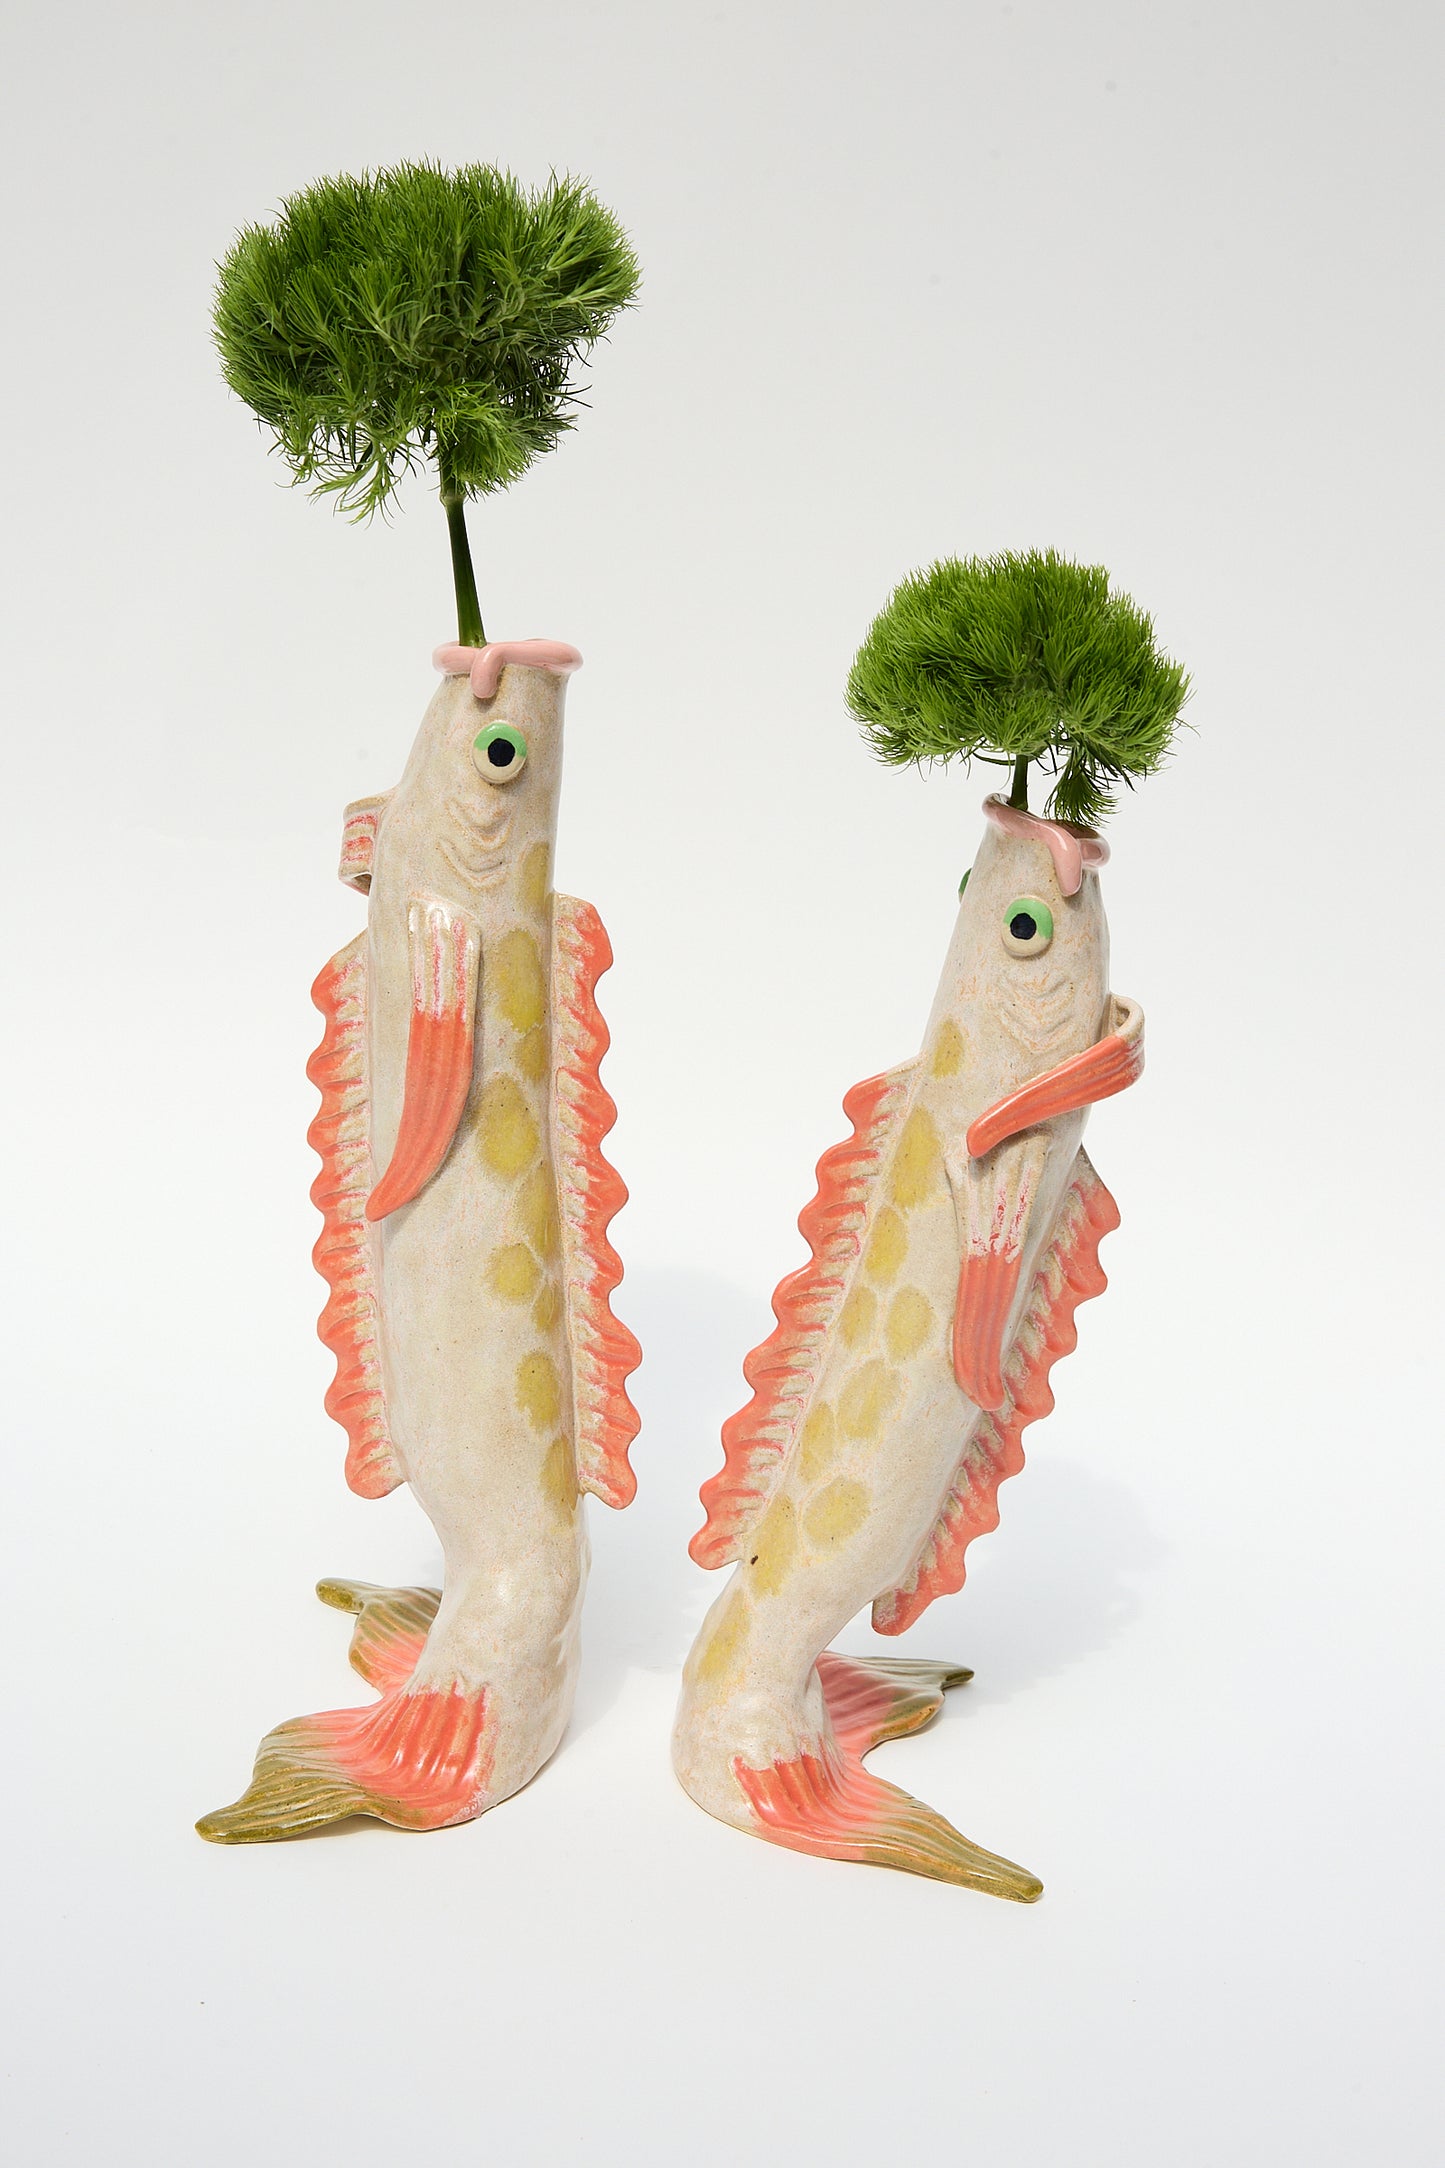 Two whimsical glazed stoneware koi fish sculptures, each adorned with a lush green plant on top, standing upright on their tail fins against a white background. The Pearce Williams Fish Vase in Pink.